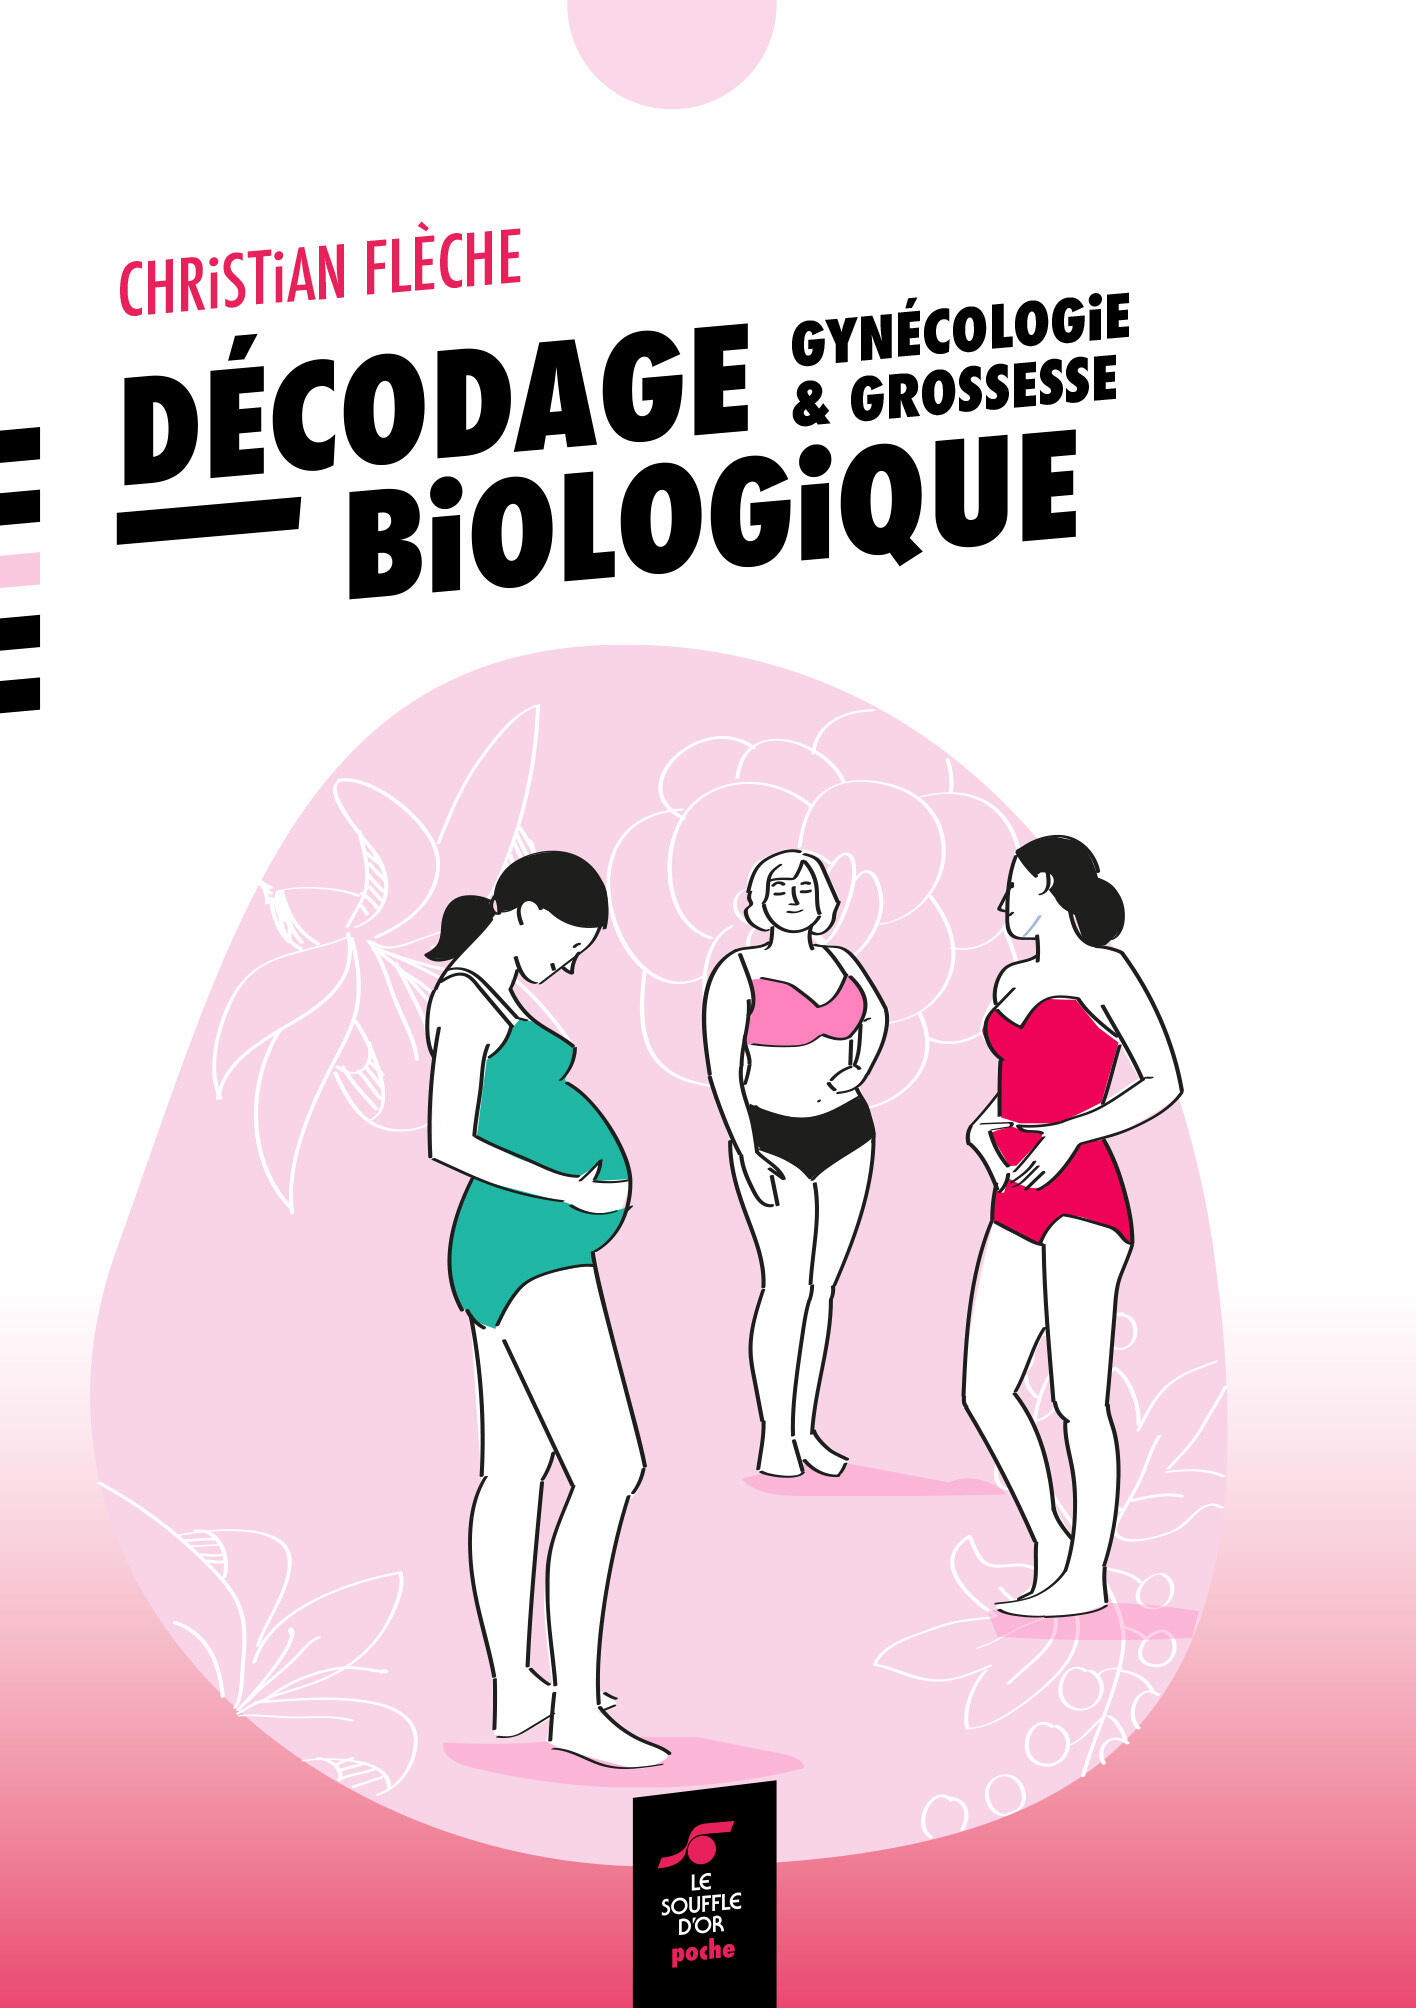 Biodecoding: gynecology and pregnancy